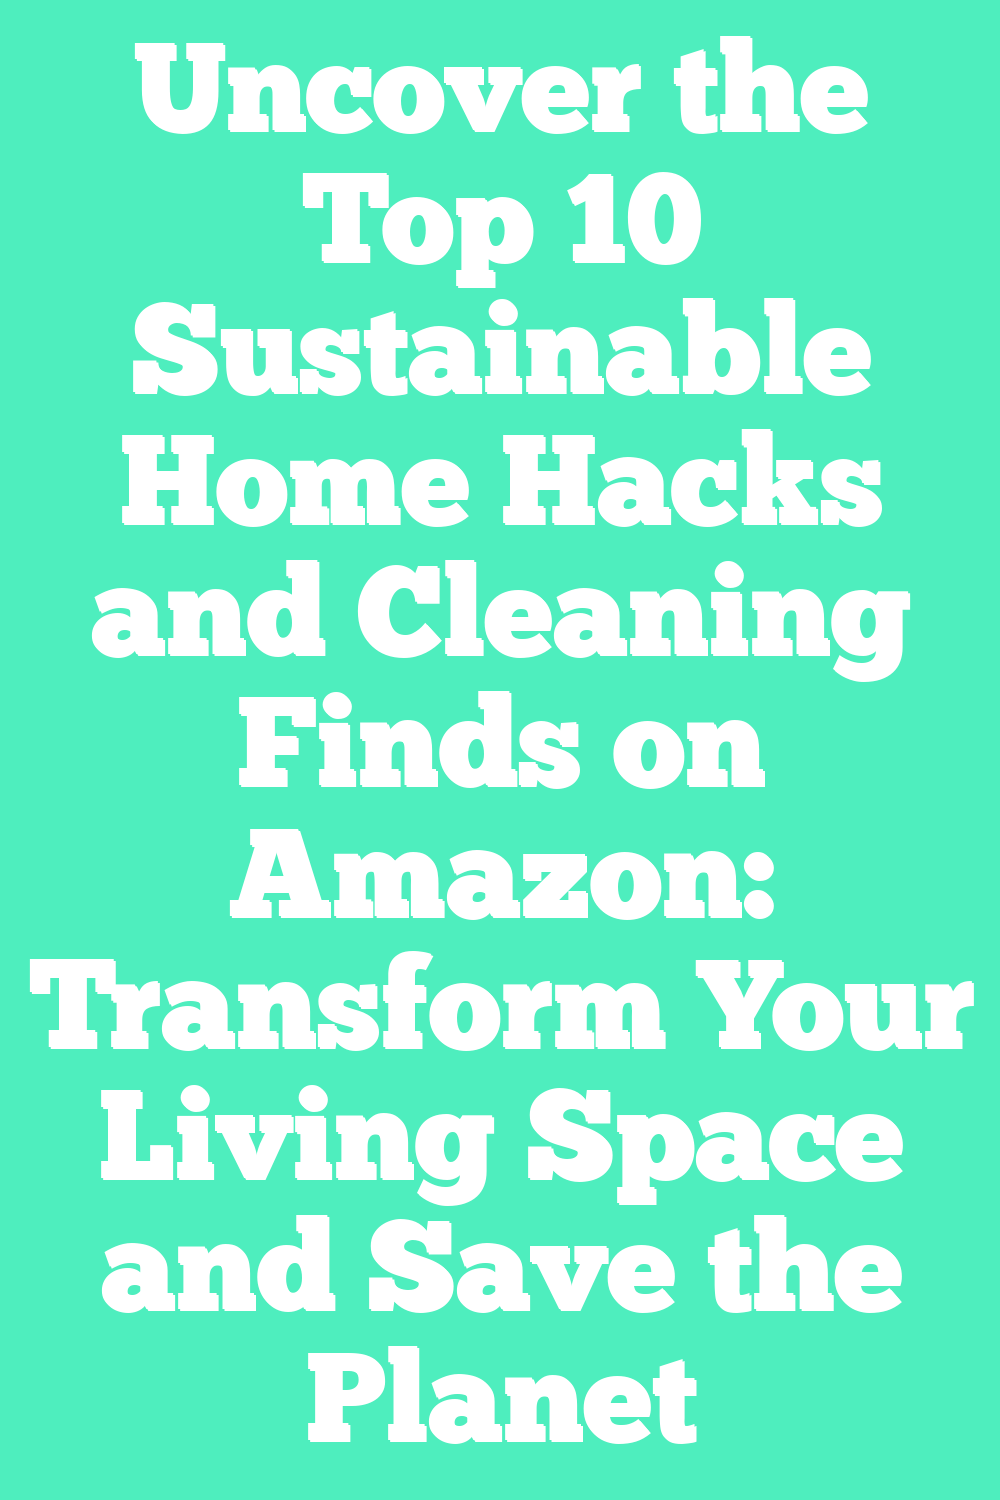 Uncover the Top 10 Sustainable Home Hacks and Cleaning Finds on Amazon: Transform Your Living Space and Save the Planet